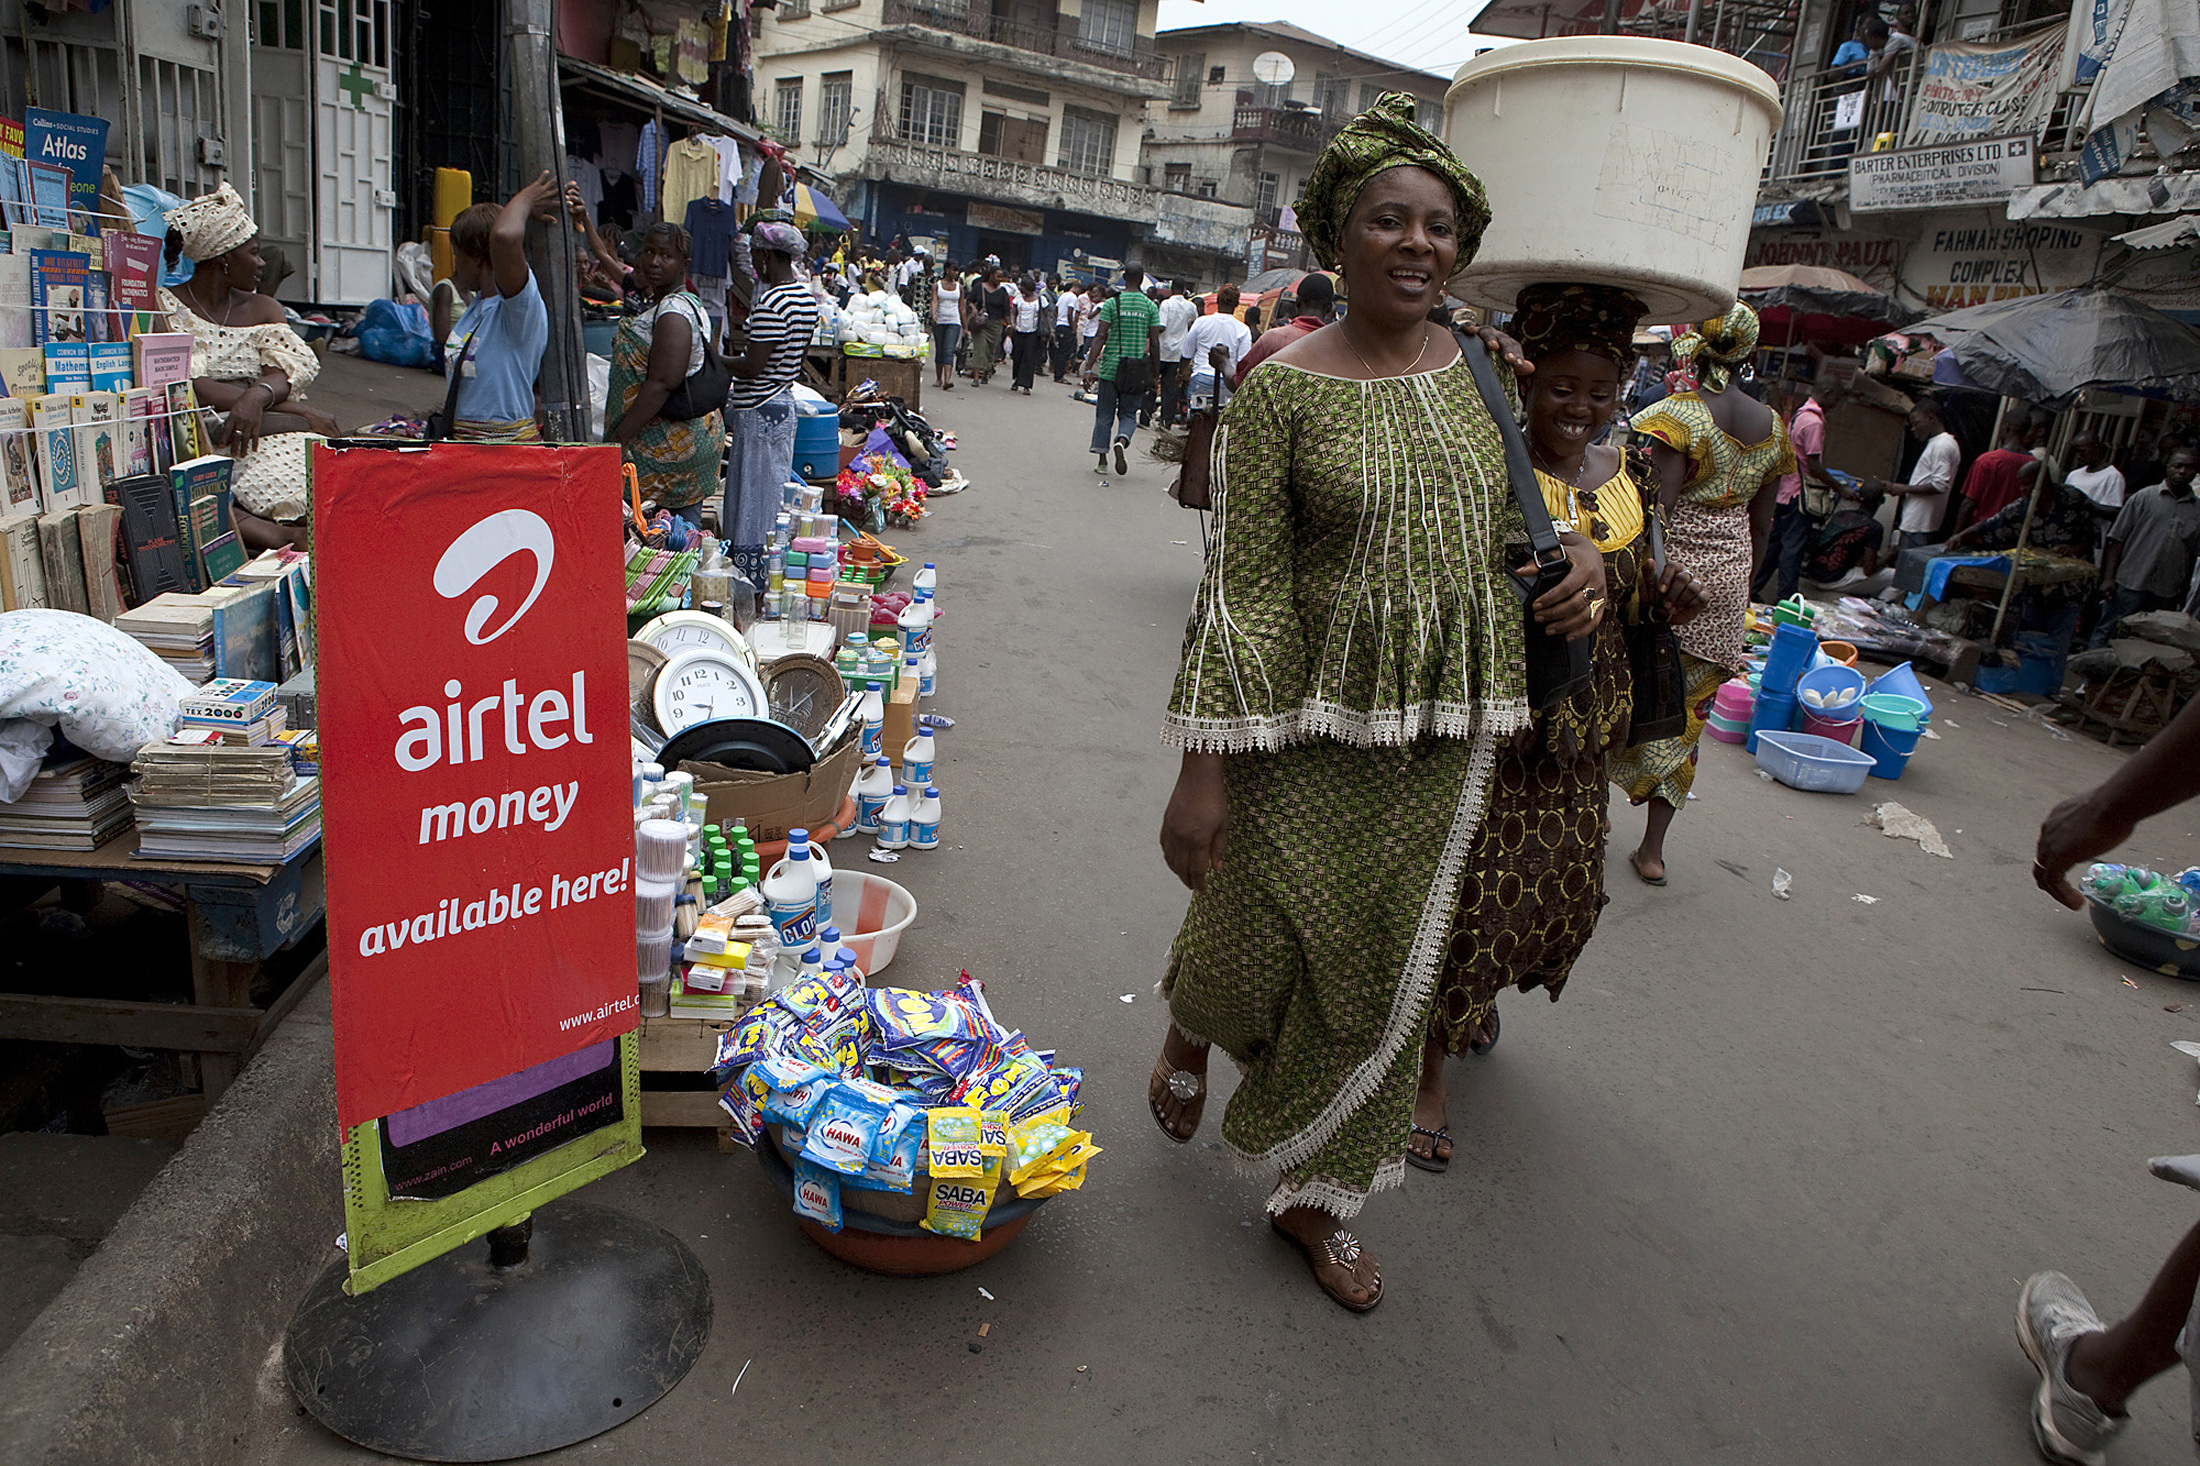 Woman walks past a sign advertising the mobile banking service Airtel Money in Freetown